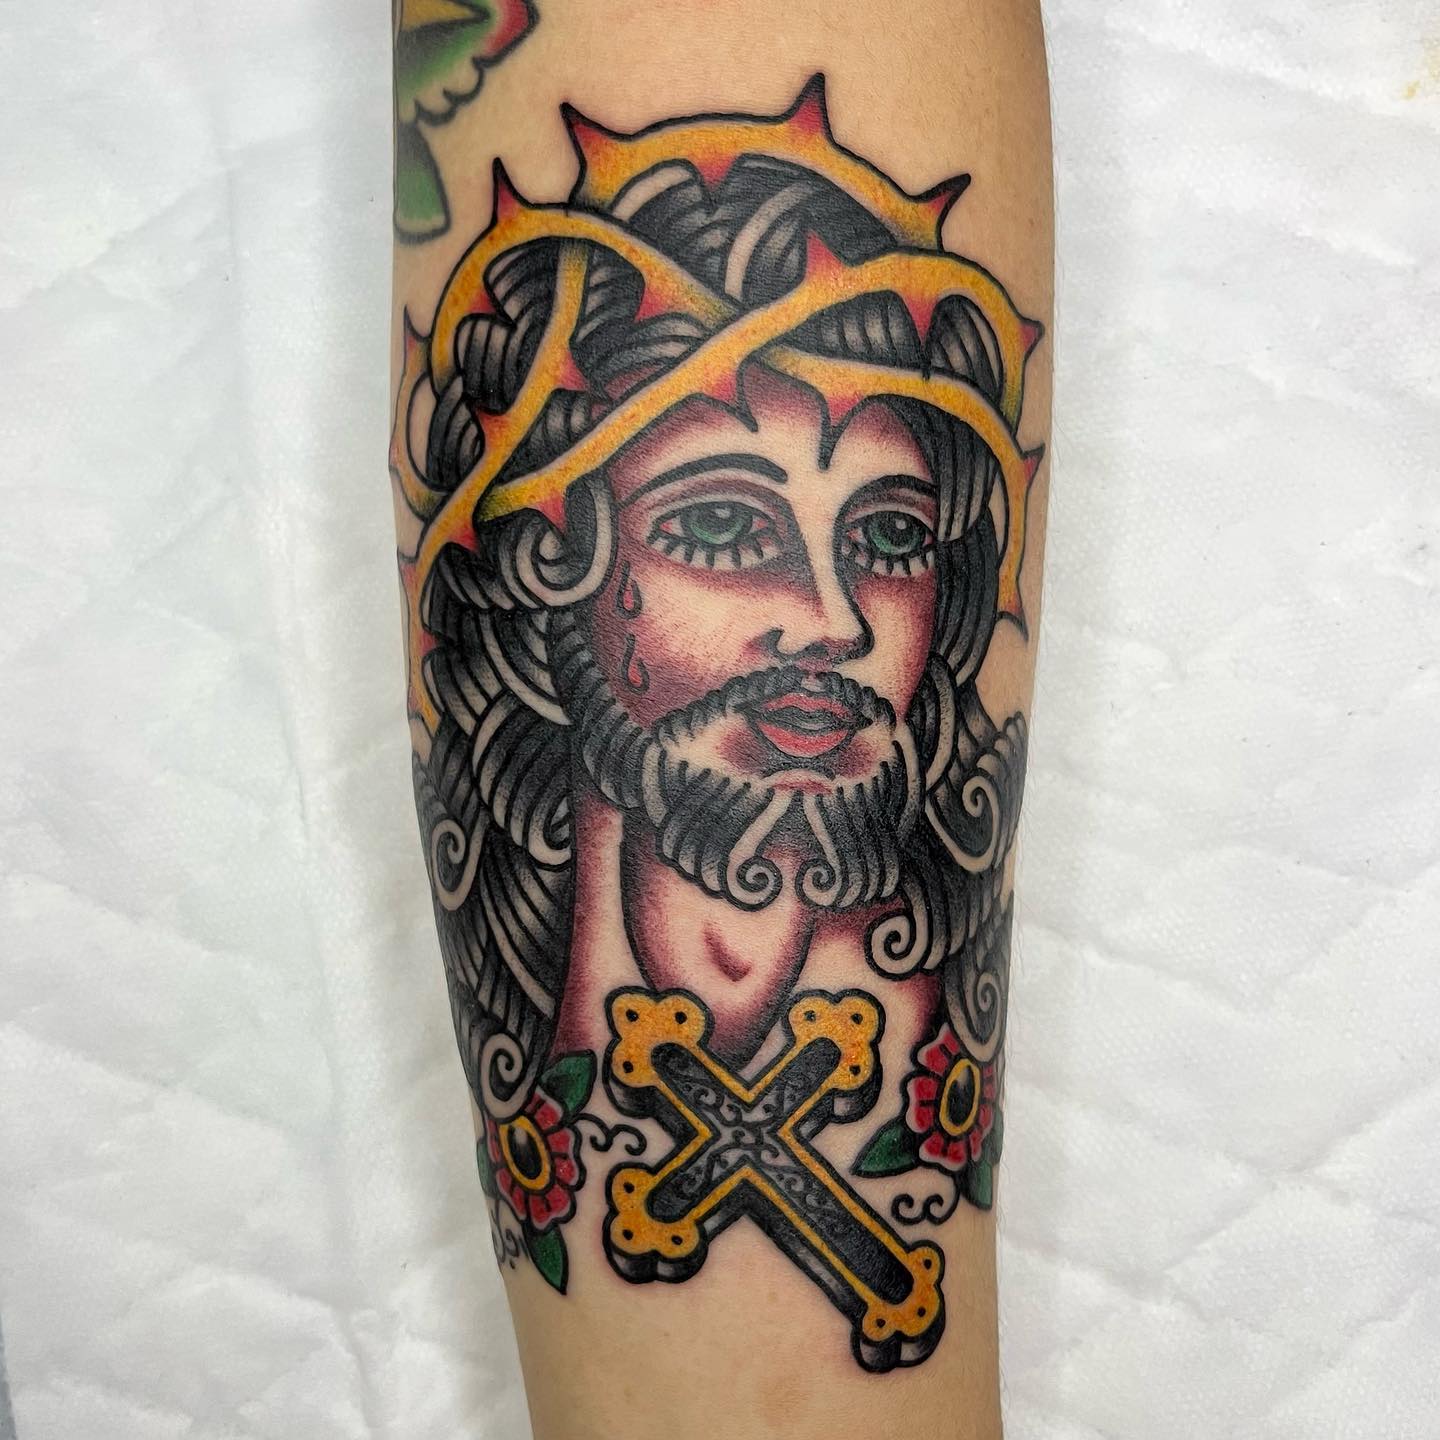 This animated Jesus tattoo are for those who like things that are animated. Plus, all of this design has an old school vibe because of the colors used and flowers below the Jesus. If you want to get a detailed cross tattoo, this is the one to go for.